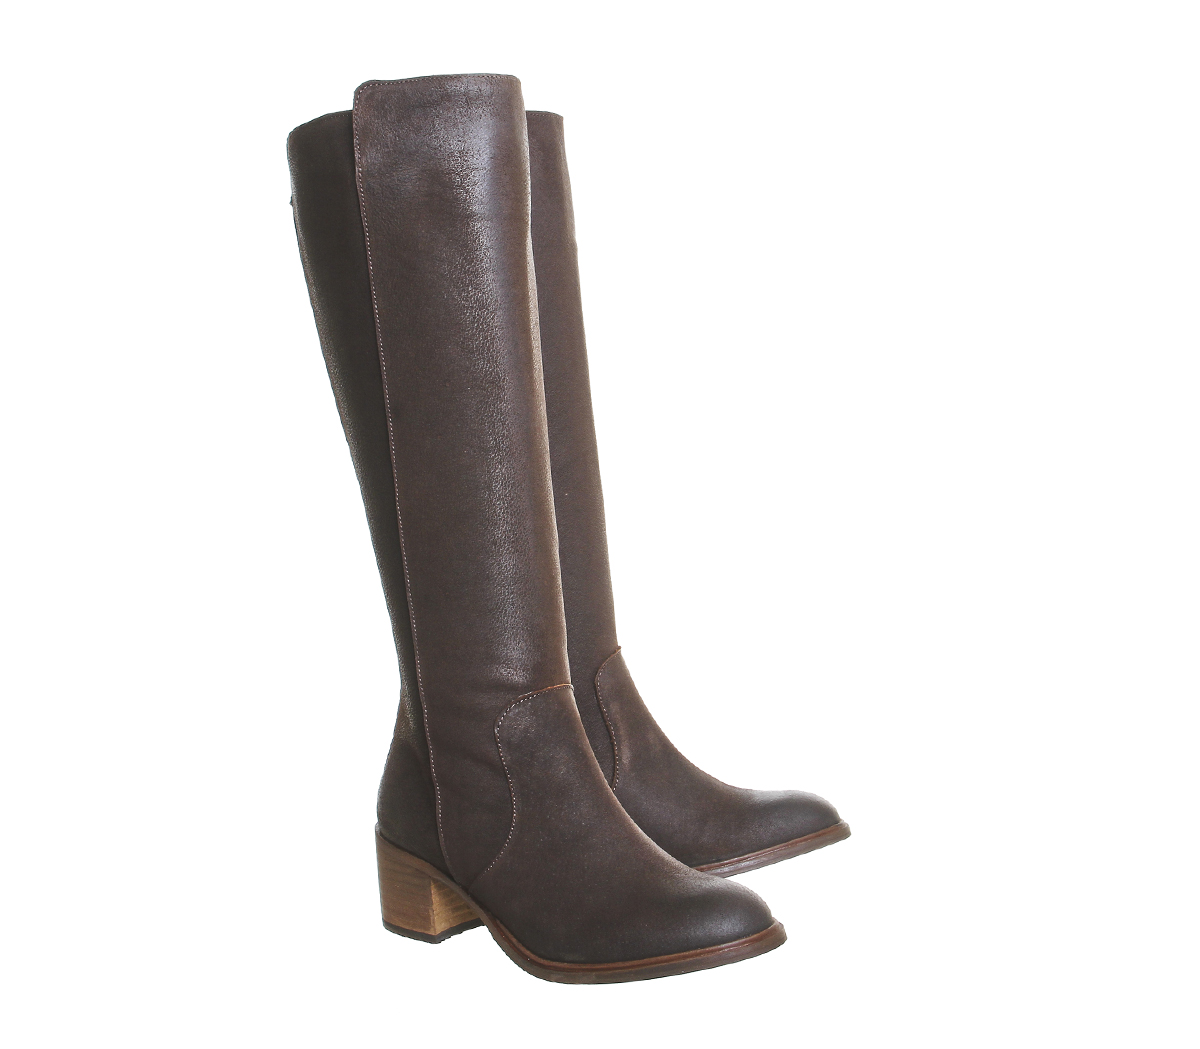 OFFICE Eastside Back Zip Boots Chocolate Leather - Knee High Boots